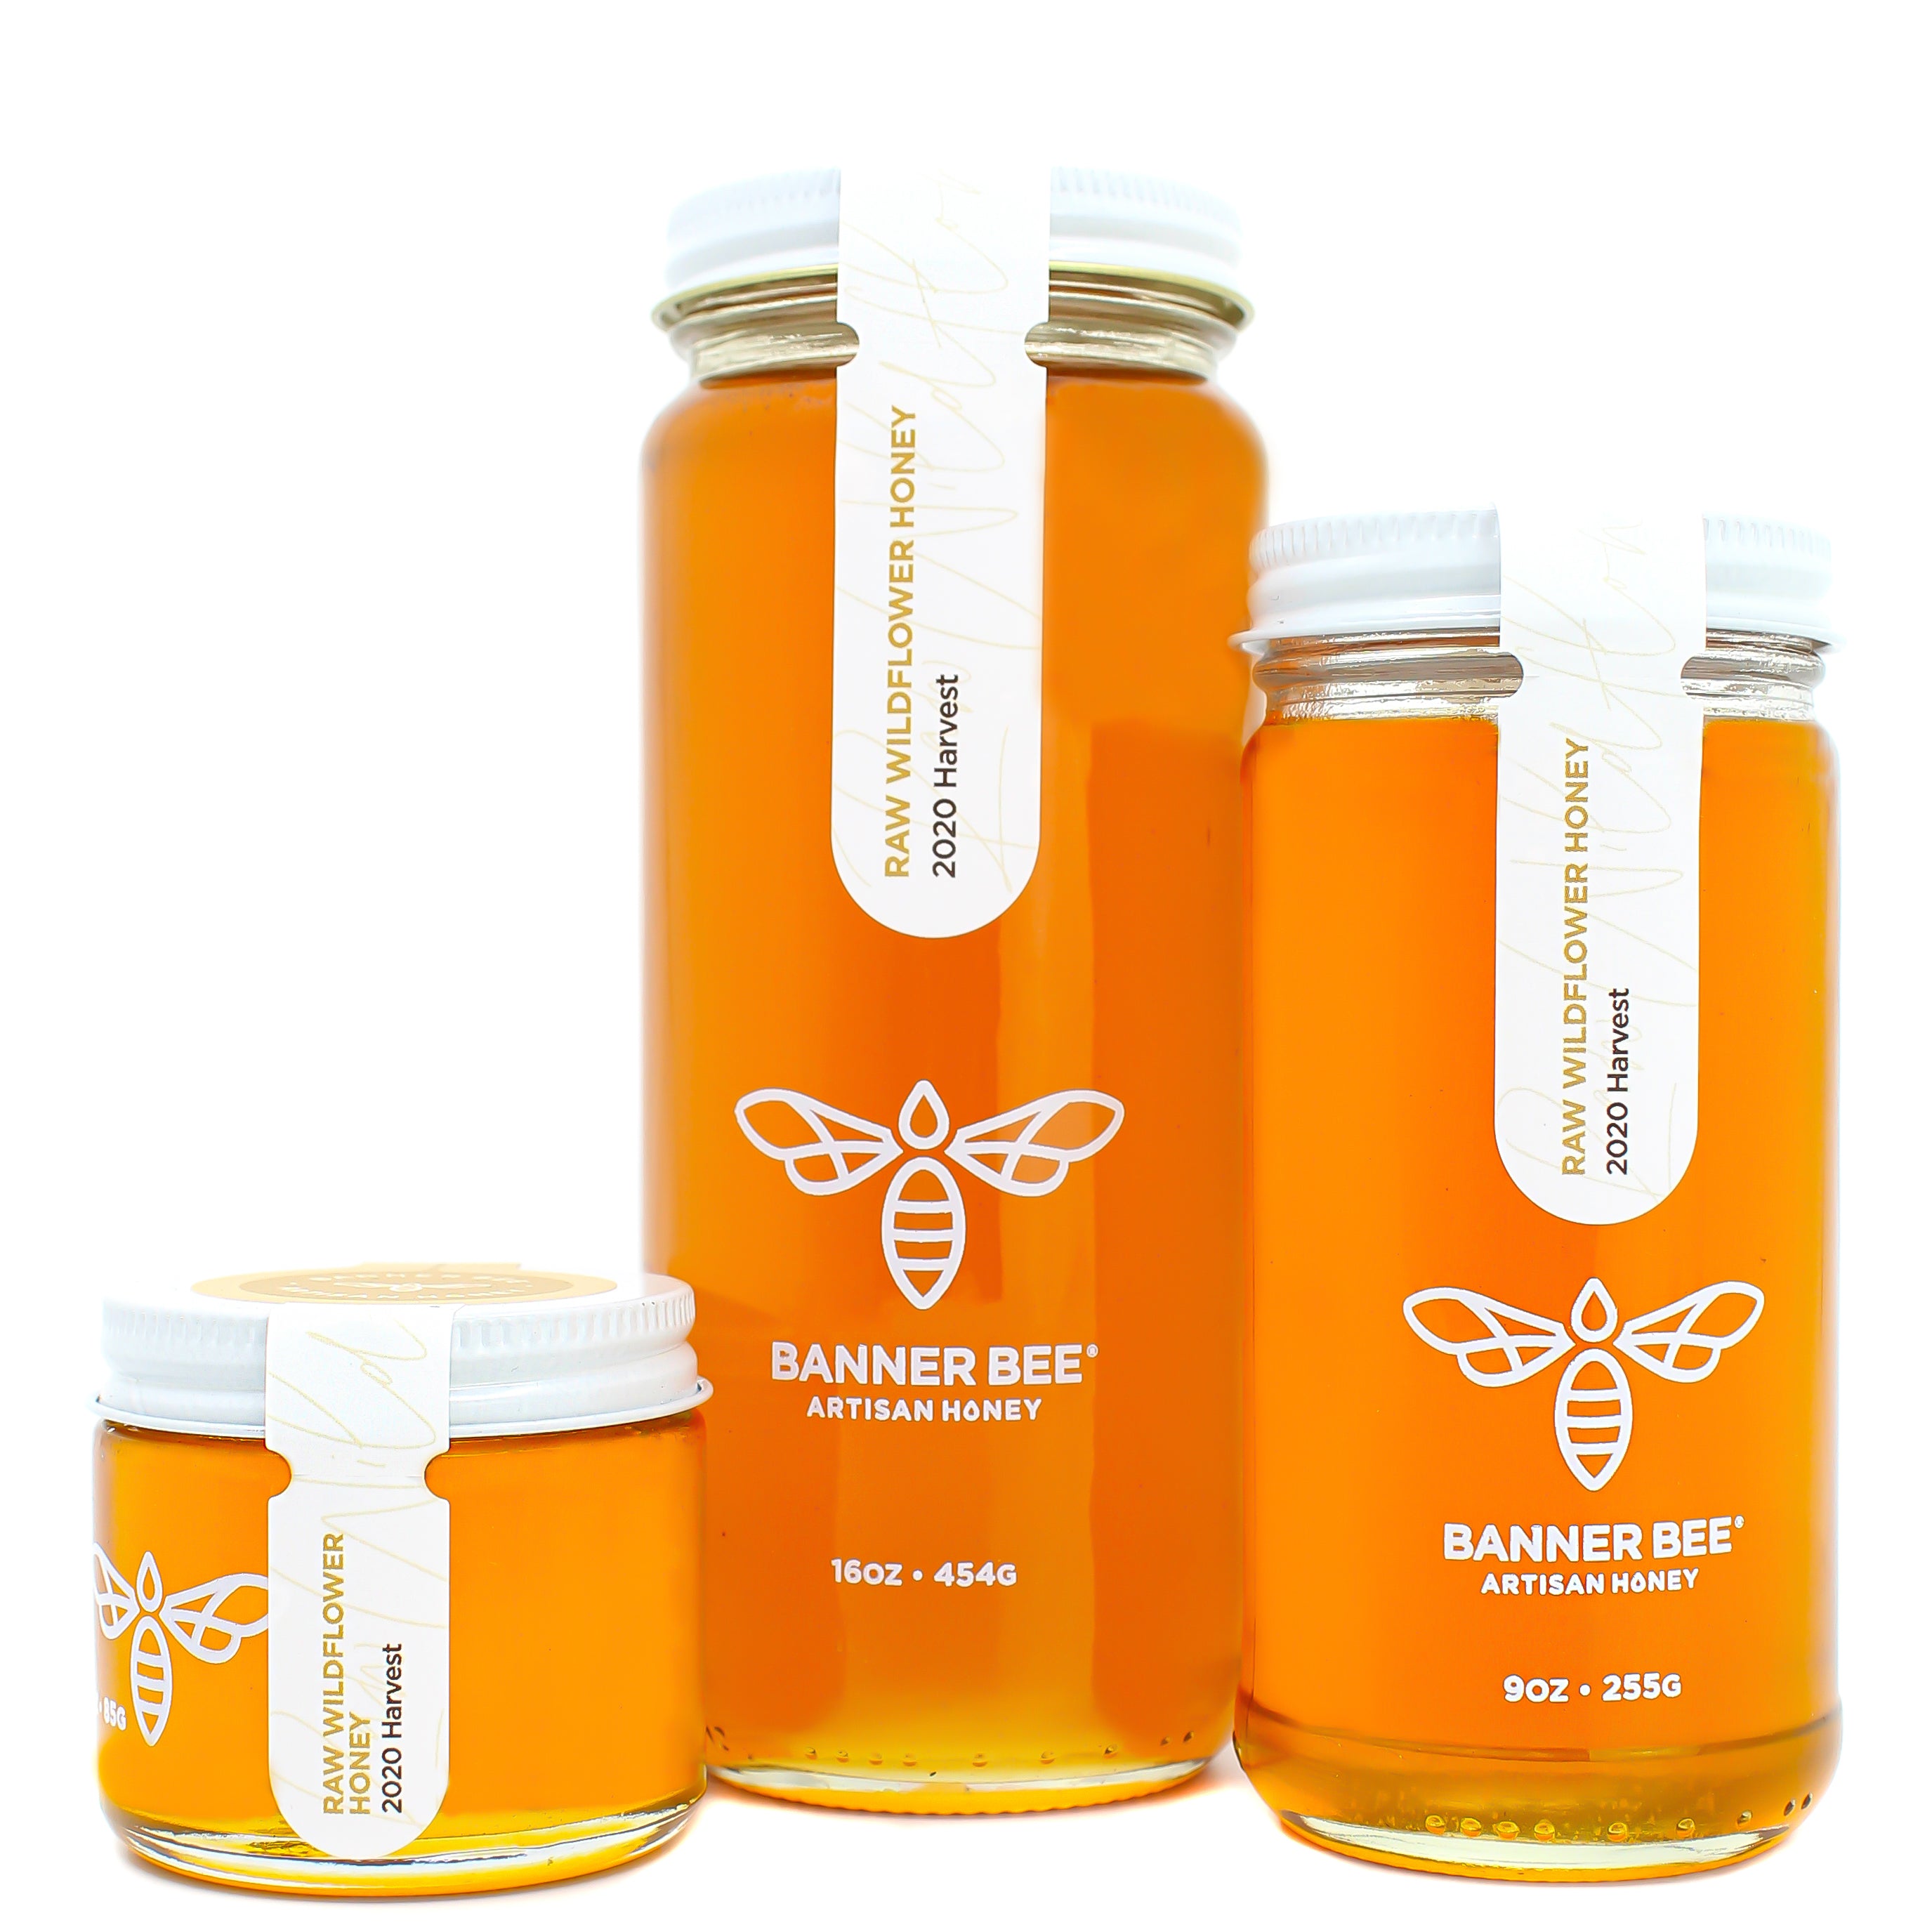 BEEKEEPER'S NATURALS Wildflower Honey - Raw, Wildcrafted, and Unprocessed-  Rich in Nutrients and Beneficial Enzymes- Notes of Mint & Lavender-100%